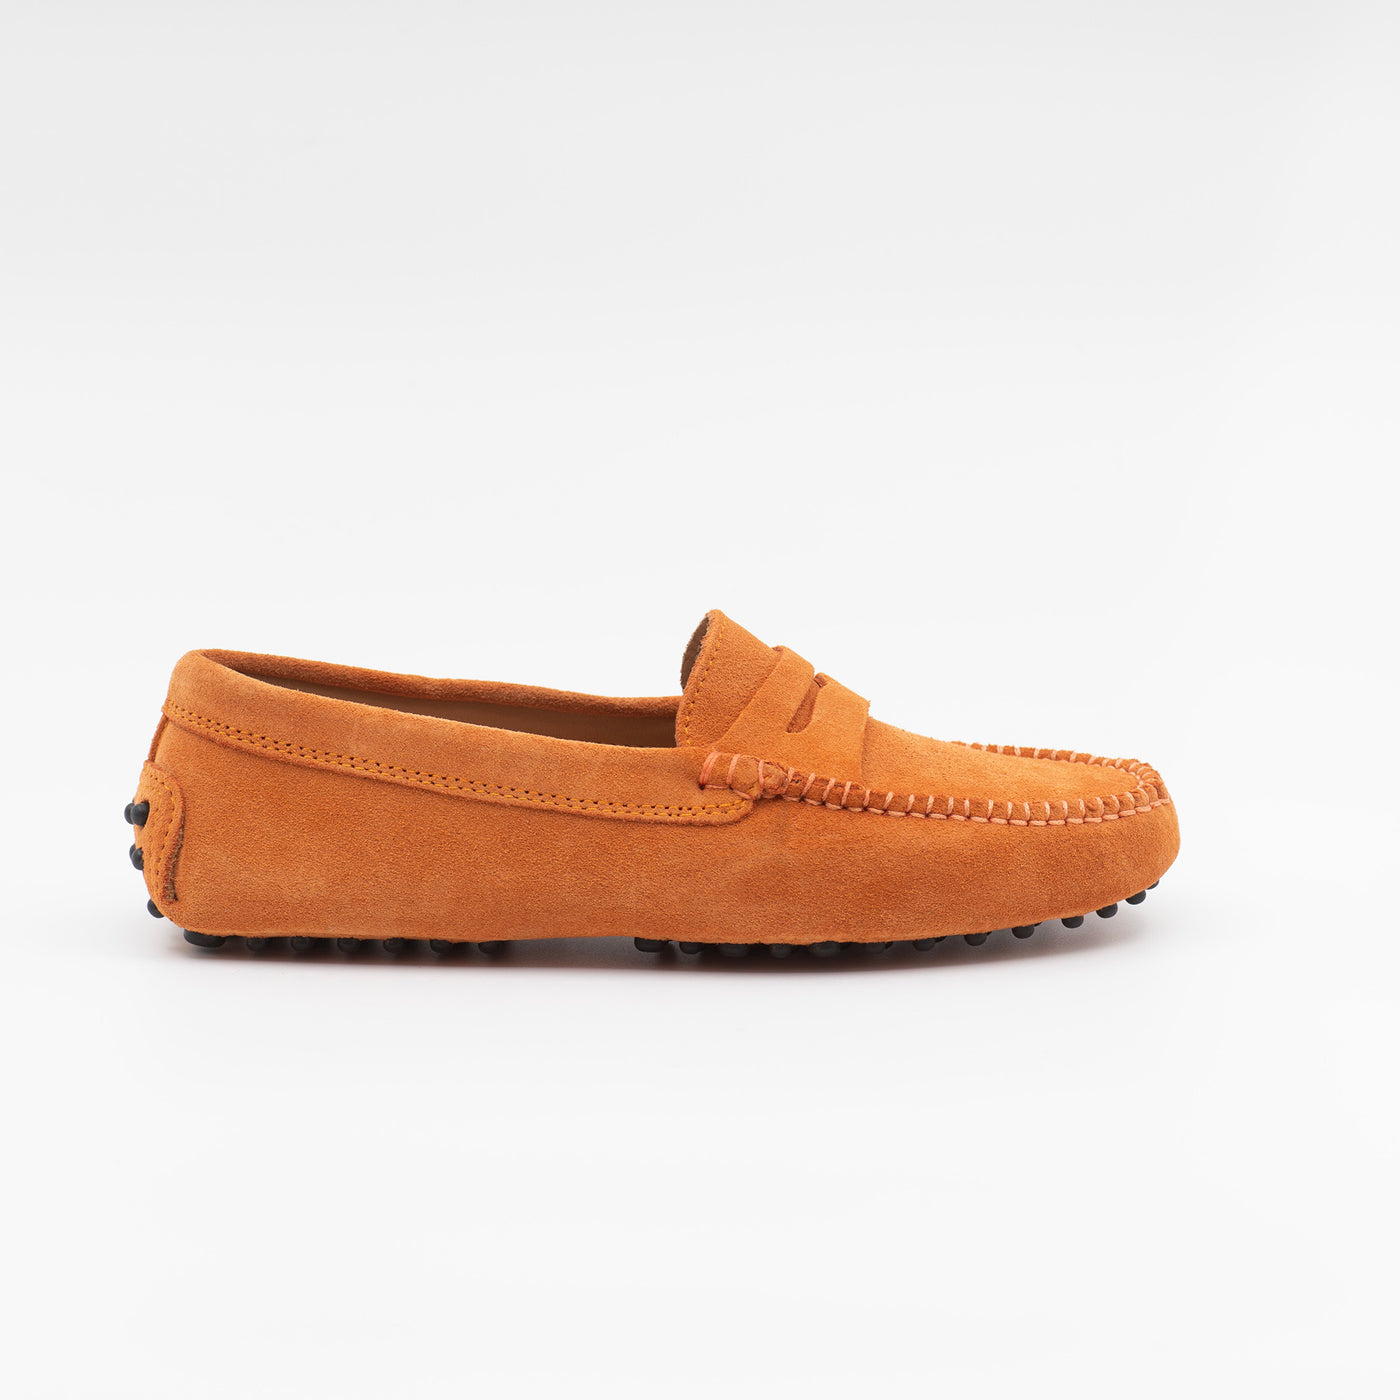 Gommino loafer in orange suede